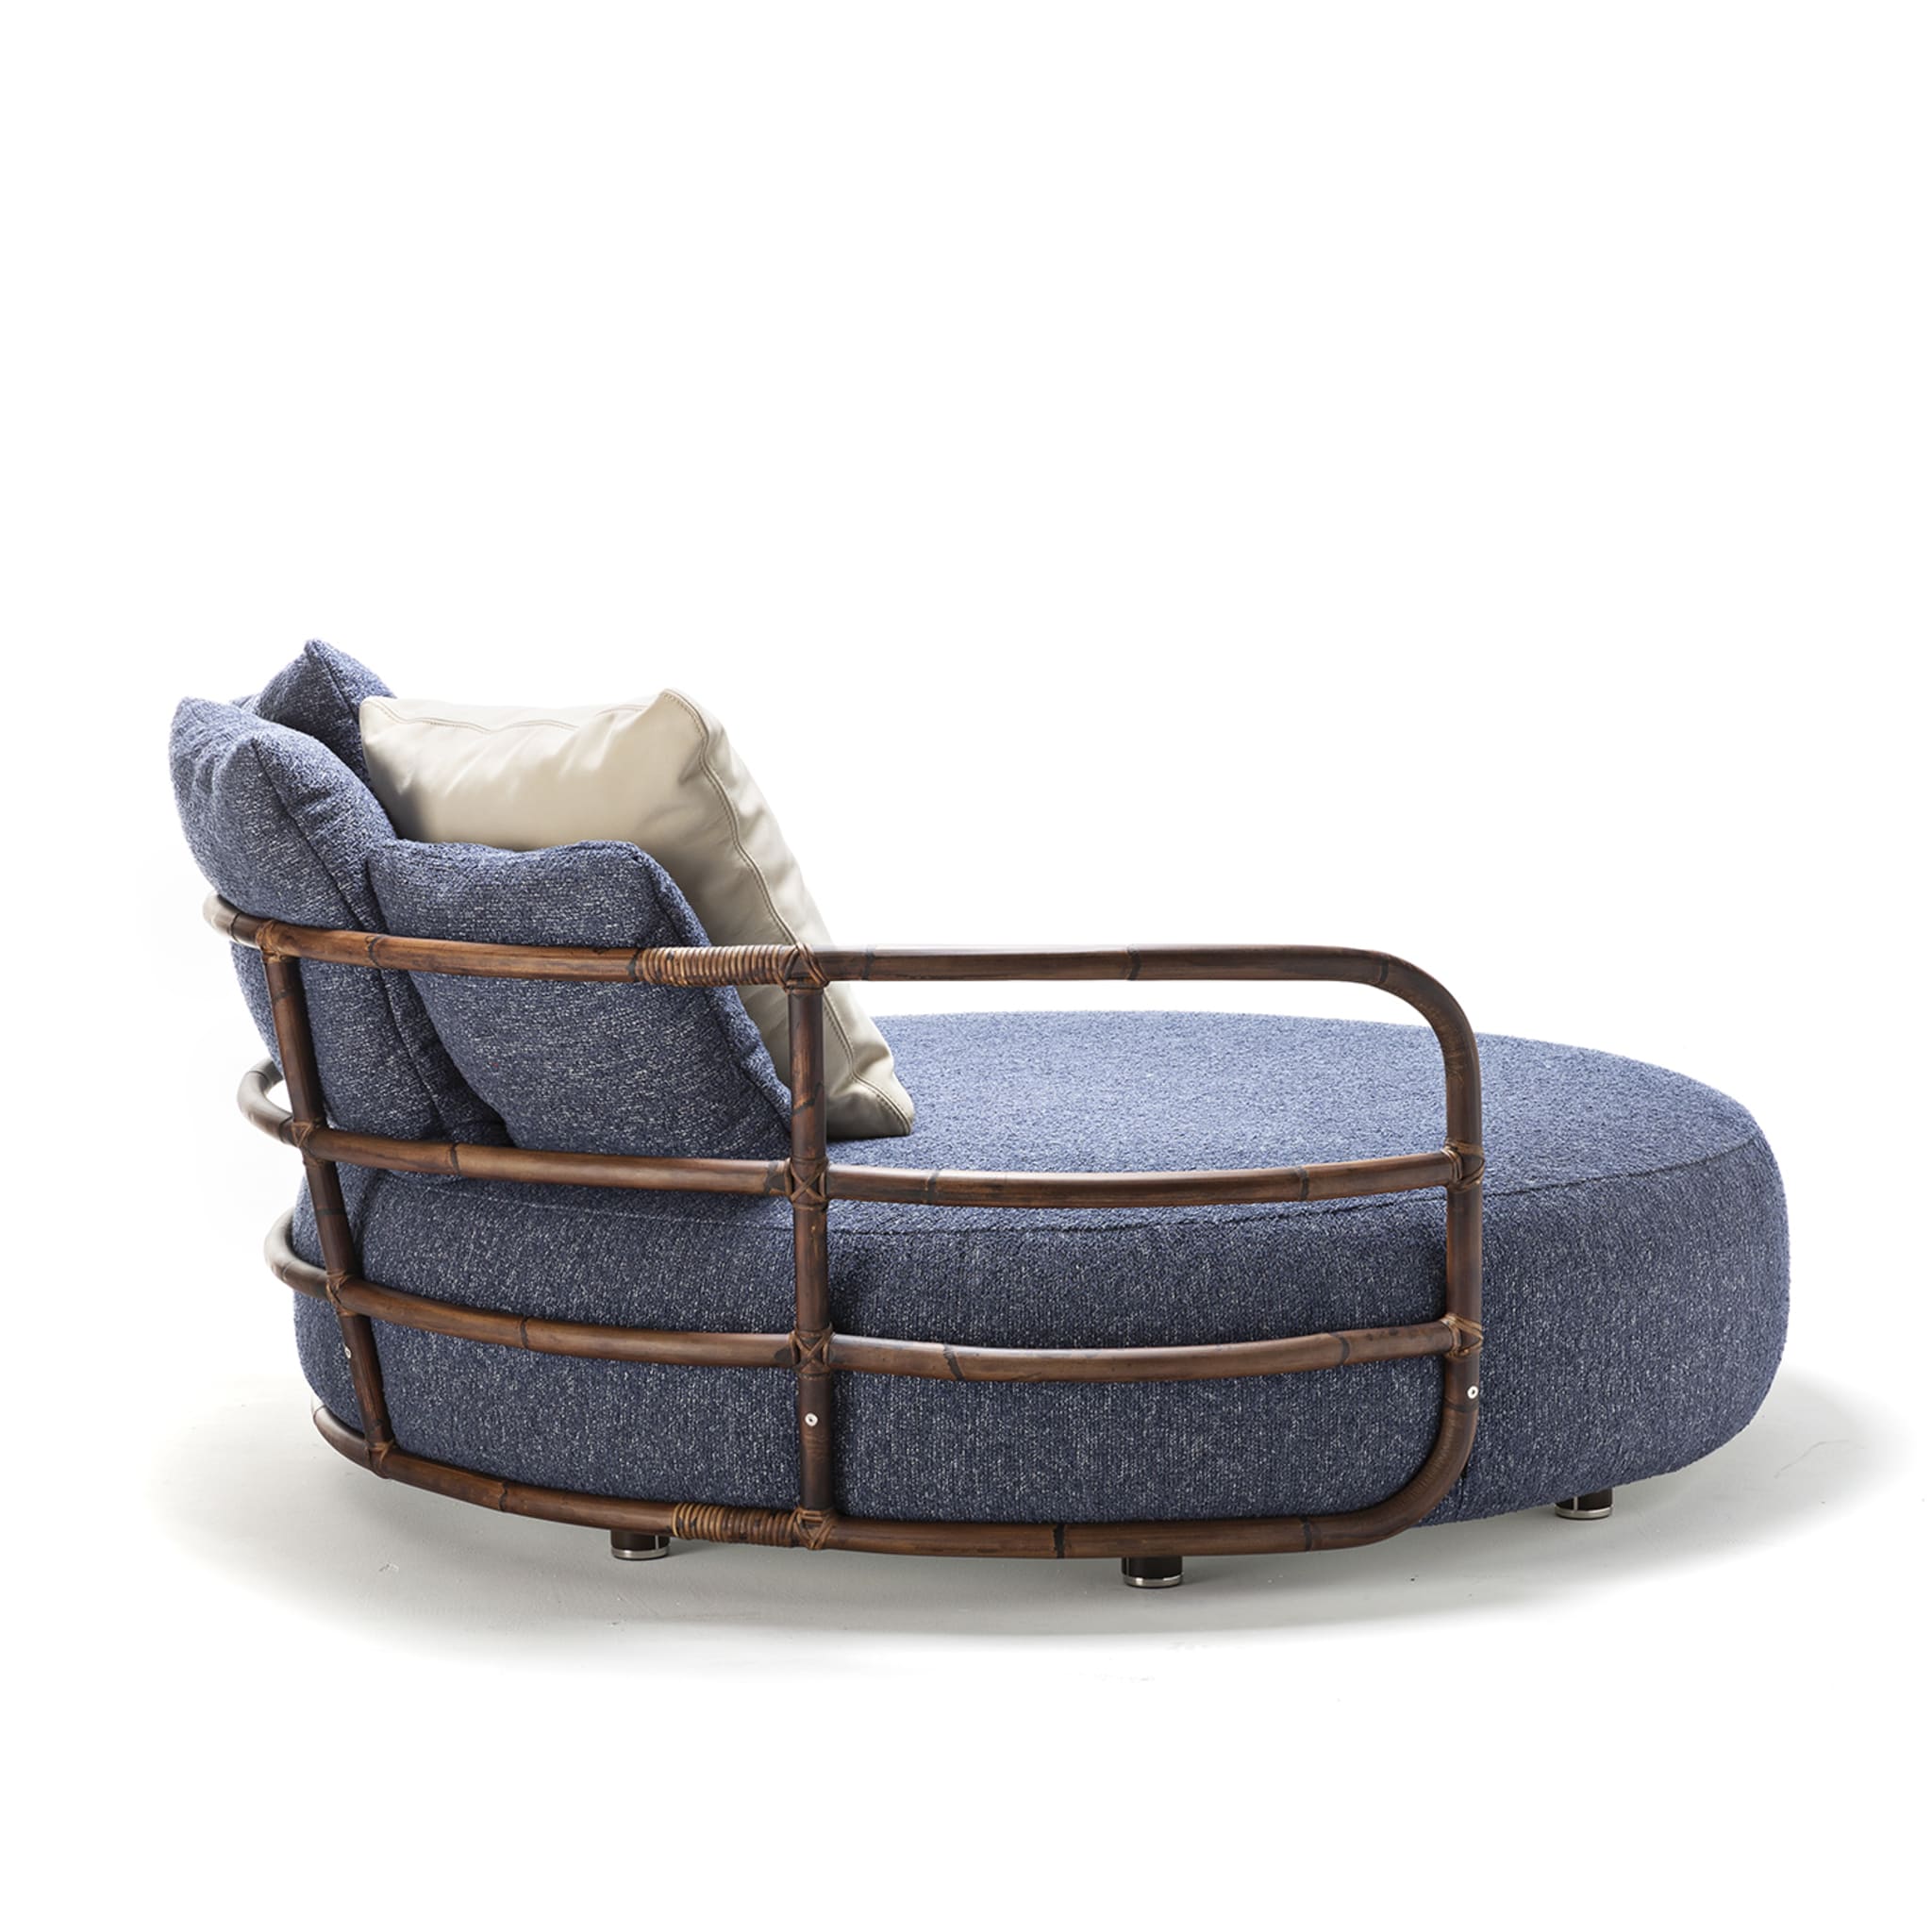 Jungle Blue Daybed by Massimo Castagna - Alternative view 2